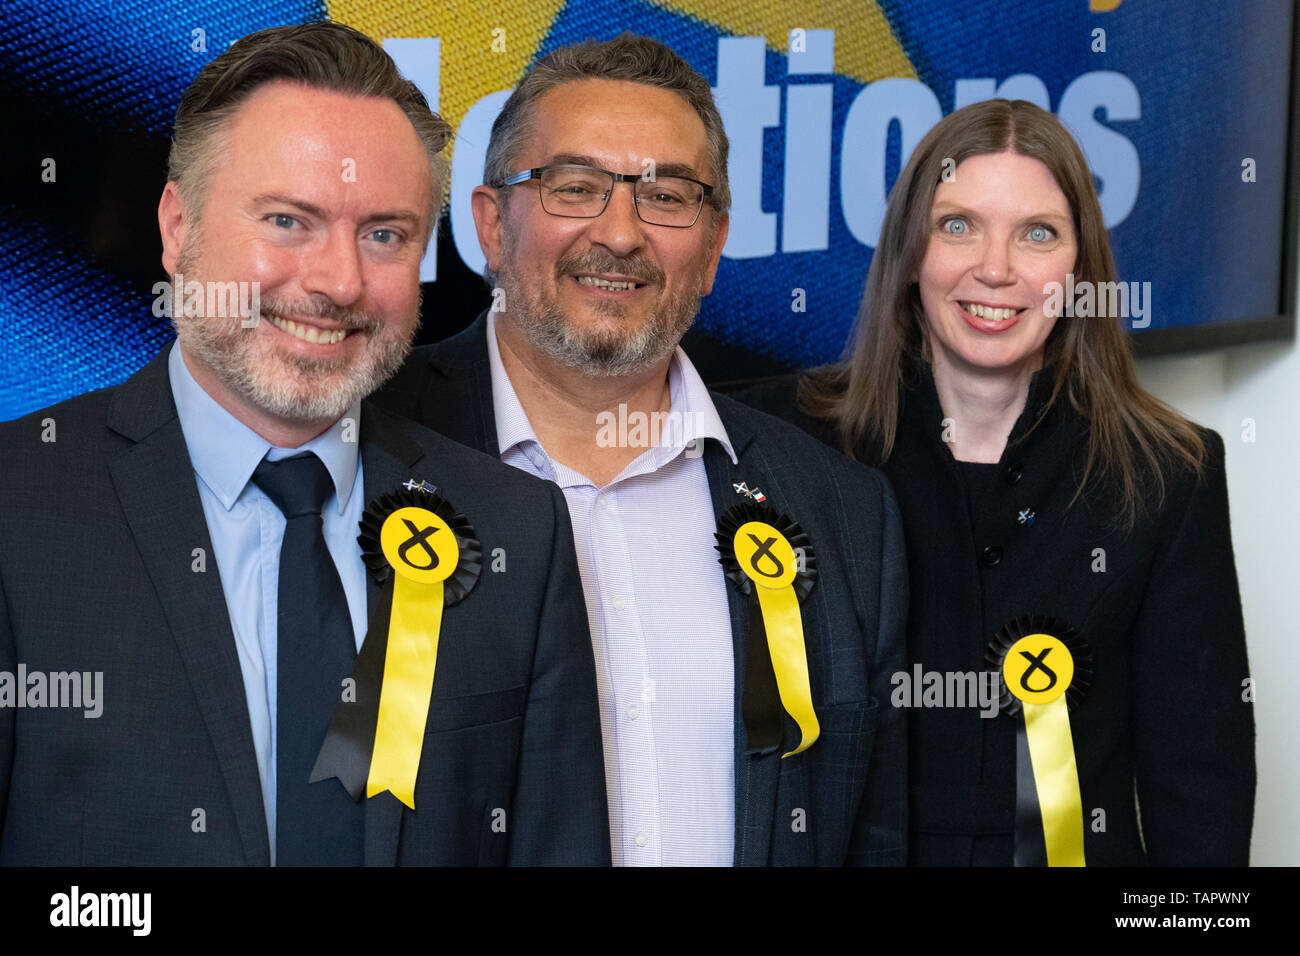 Edinburgh, Scotland, UK. 27th May, 2019. The six new Scottish MEPs are declared at the City Chambers in Edinburgh, Pictured l to r SNP's Alyn Smith, Christian Allard and Aileen McLeod, Credit: Iain Masterton/Alamy Live News Stock Photo